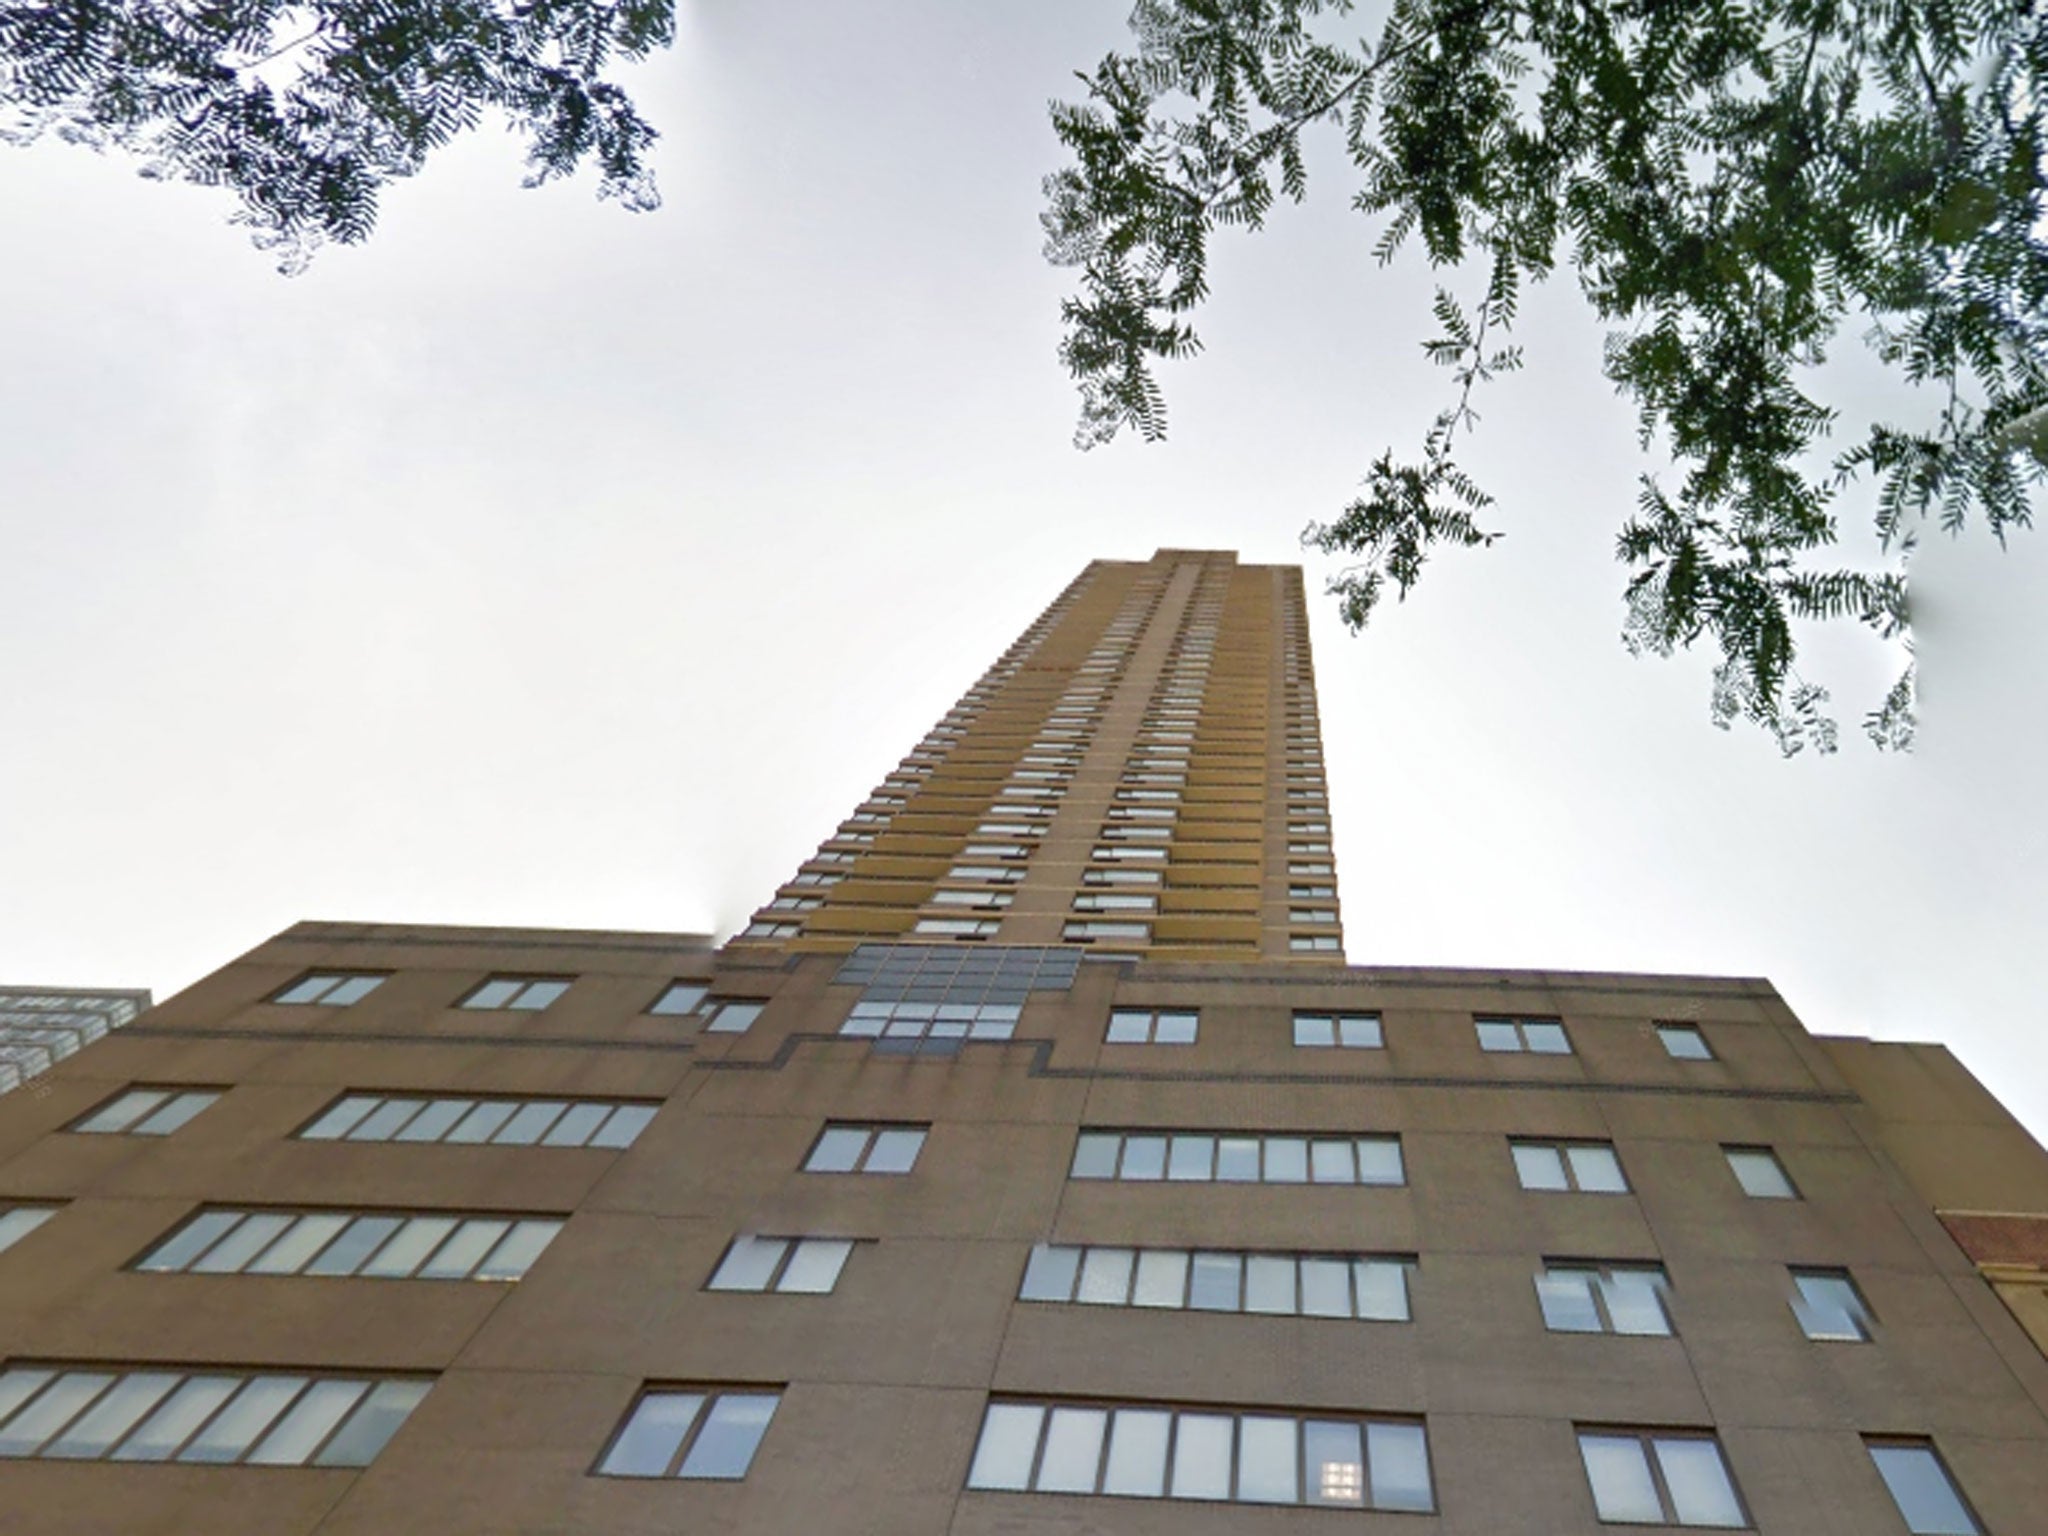 Dmitriy Kanarikov, a systems analyst from Brooklyn, pushed his son Kirill off a ledge on the 52-floor building a short distance from Columbus Circle and the Lincoln Center.